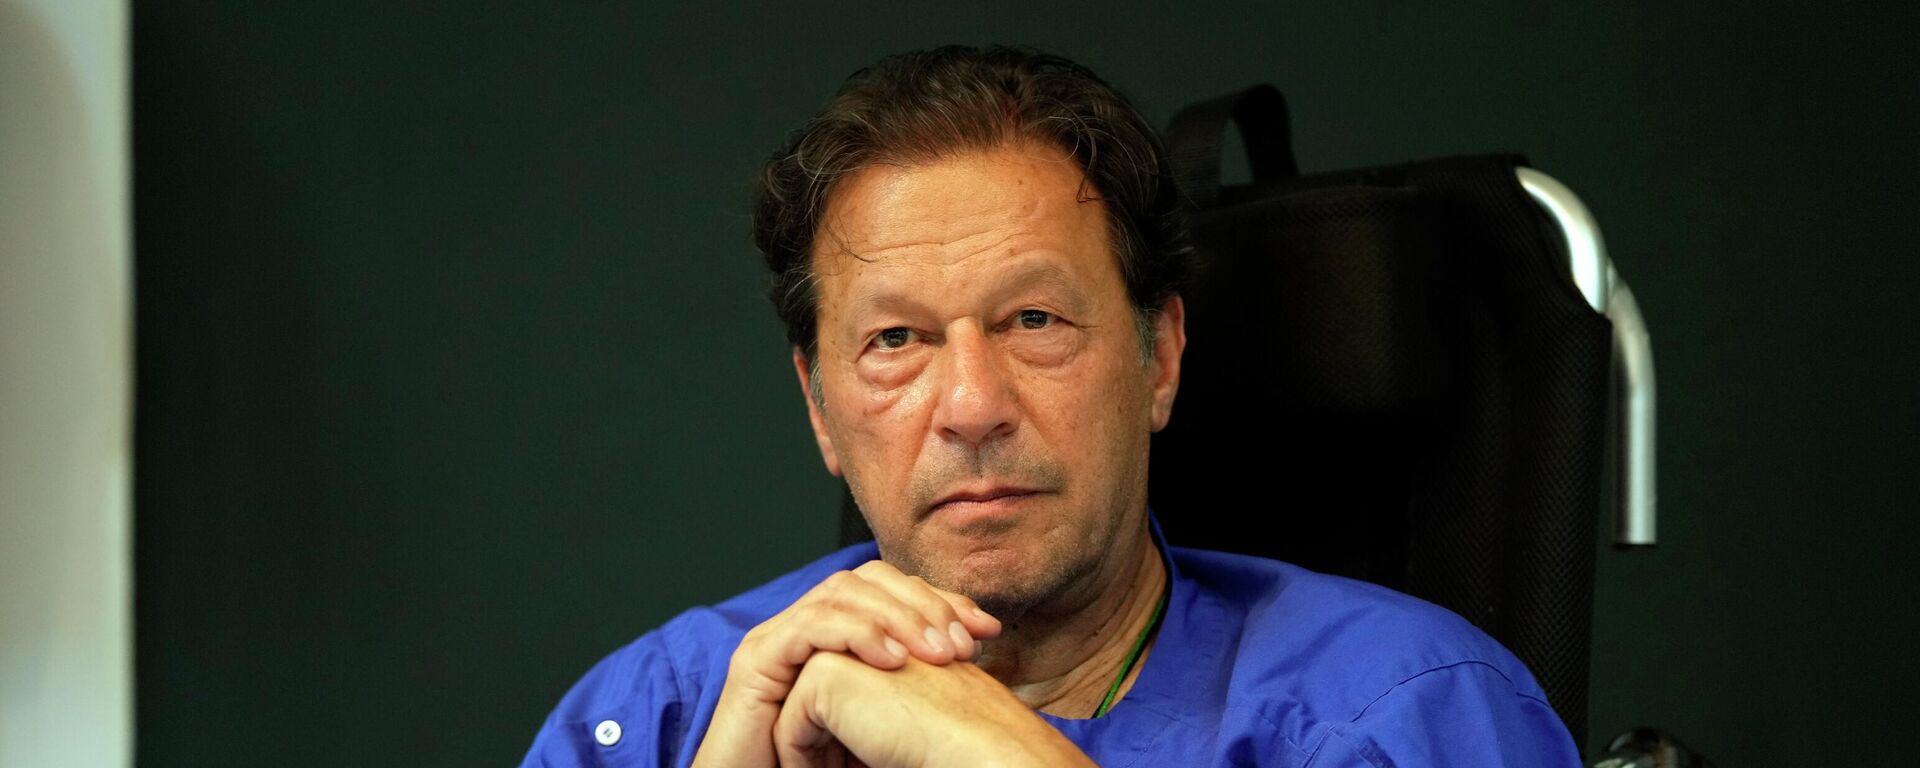 Former Pakistani Prime Minister Imran Khan speaks during a news conference in Shaukat Khanum hospital, where is being treated for a gunshot wound in Lahore, Pakistan, on Nov. 4, 2022. - Sputnik India, 1920, 31.01.2023